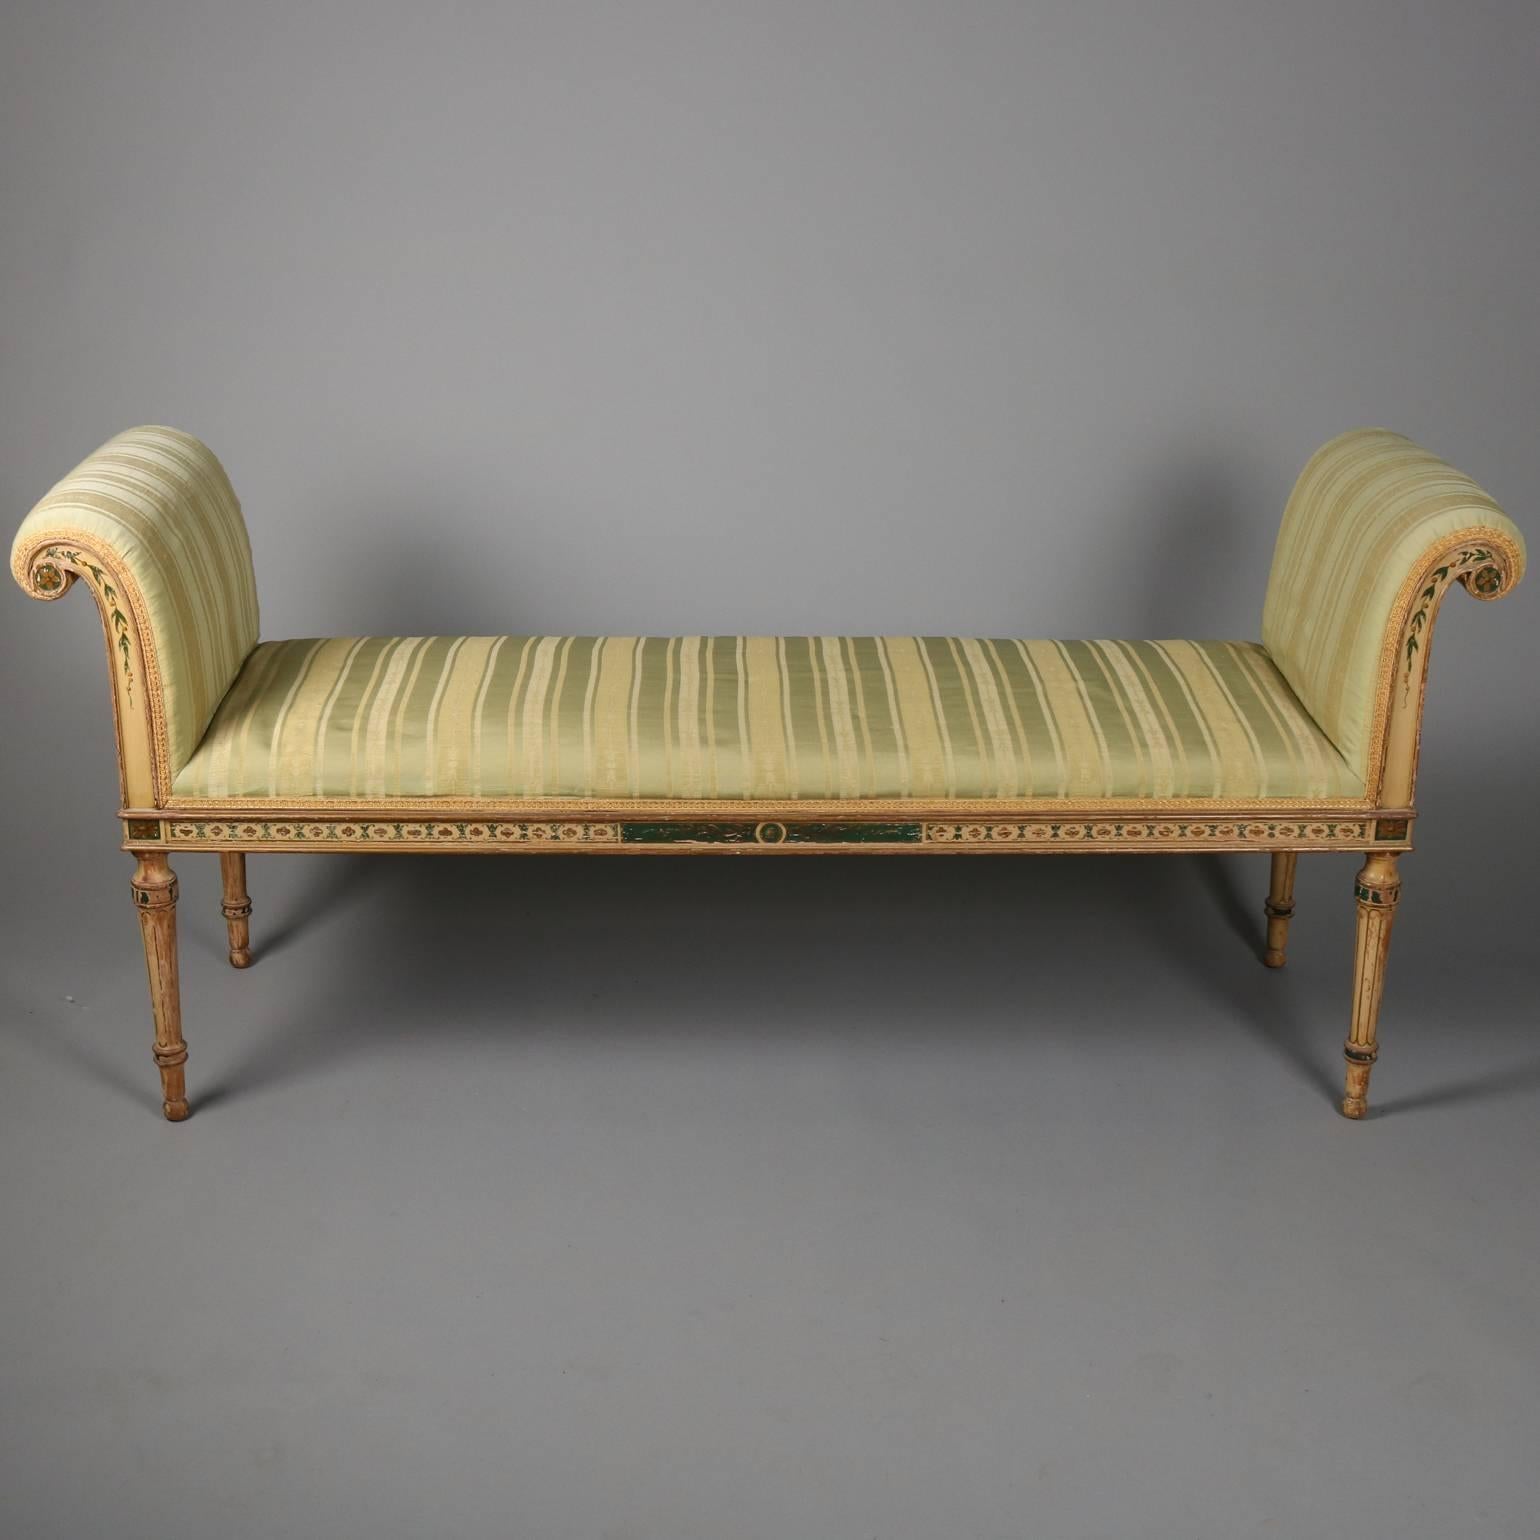 Antique Continental Italian Venetian upholstered window bench features hand-painted and stenciled foliate decoration, scrolled arms and tapered legs, circa 1880

Measures: 29